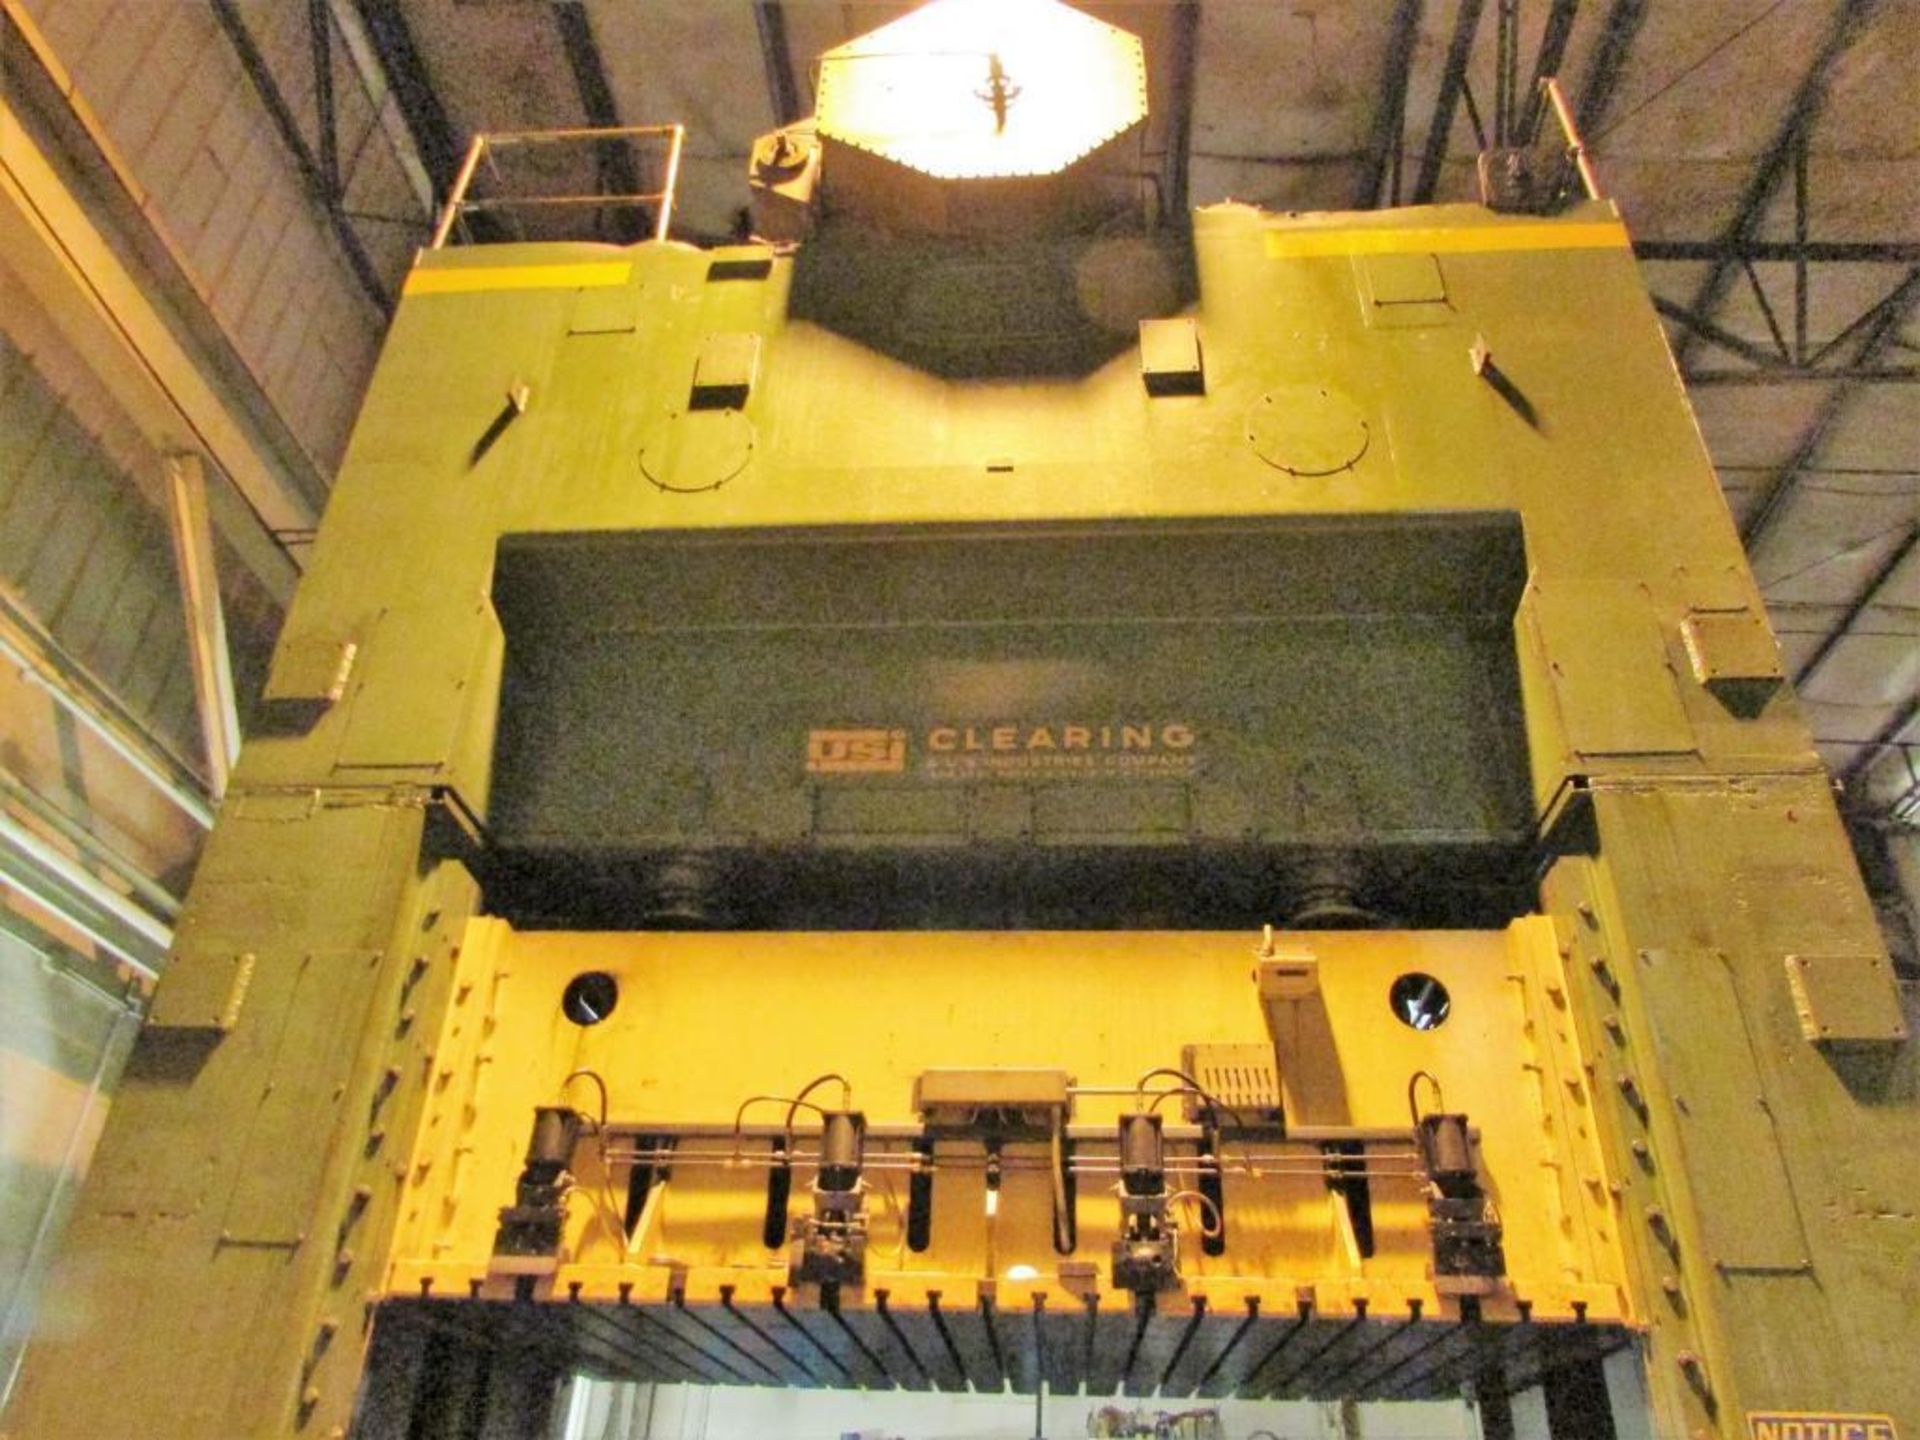 USI Clearing SE4-500-144-84 500 Ton Four Point Straight Side Press - Image 3 of 18